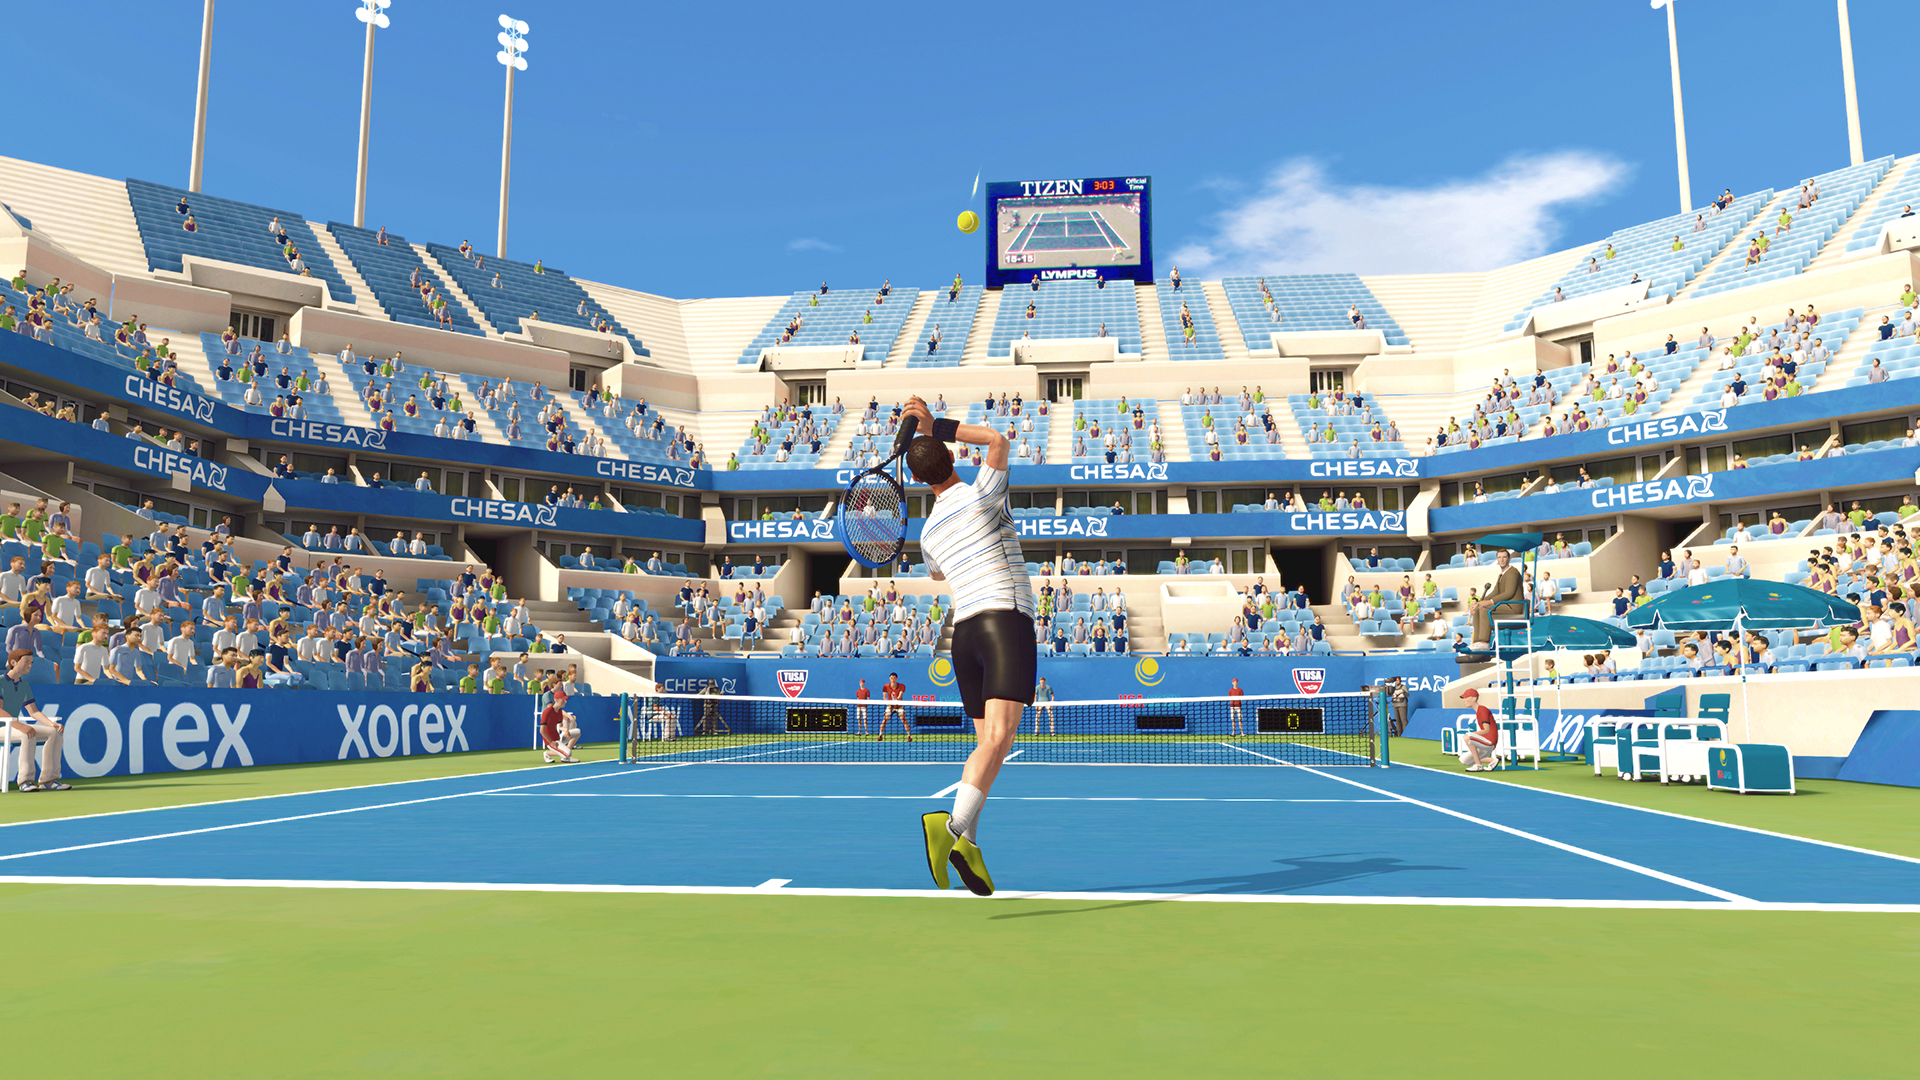 Find the best laptops for First Person Tennis - The Real Tennis Simulator